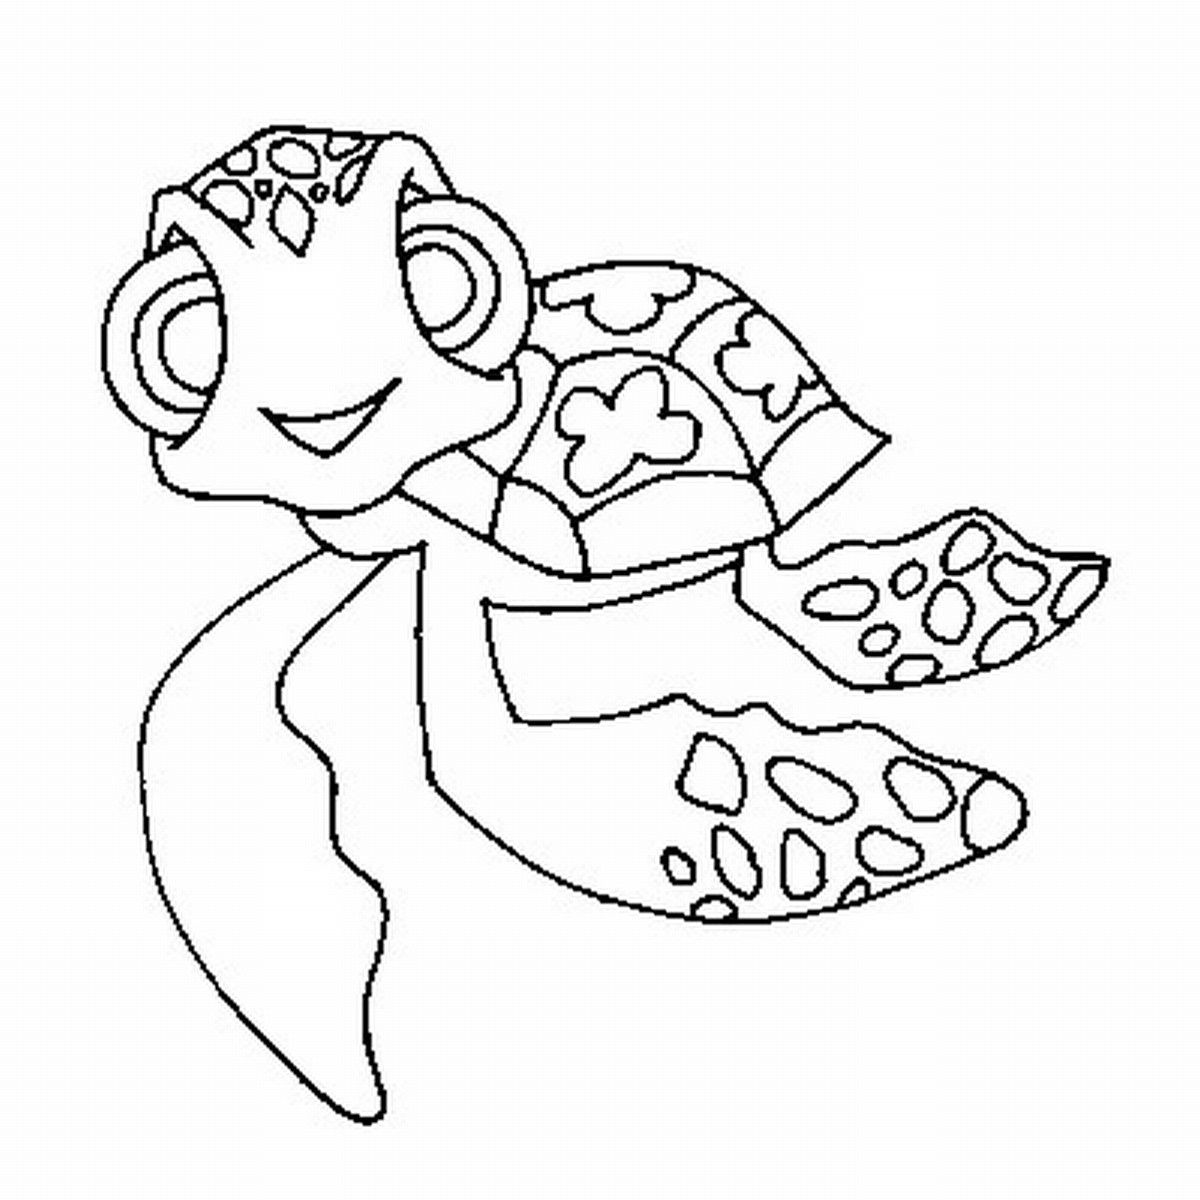 Ninja Turtle Coloring Pages Free Printable Turtle Coloring Page ...